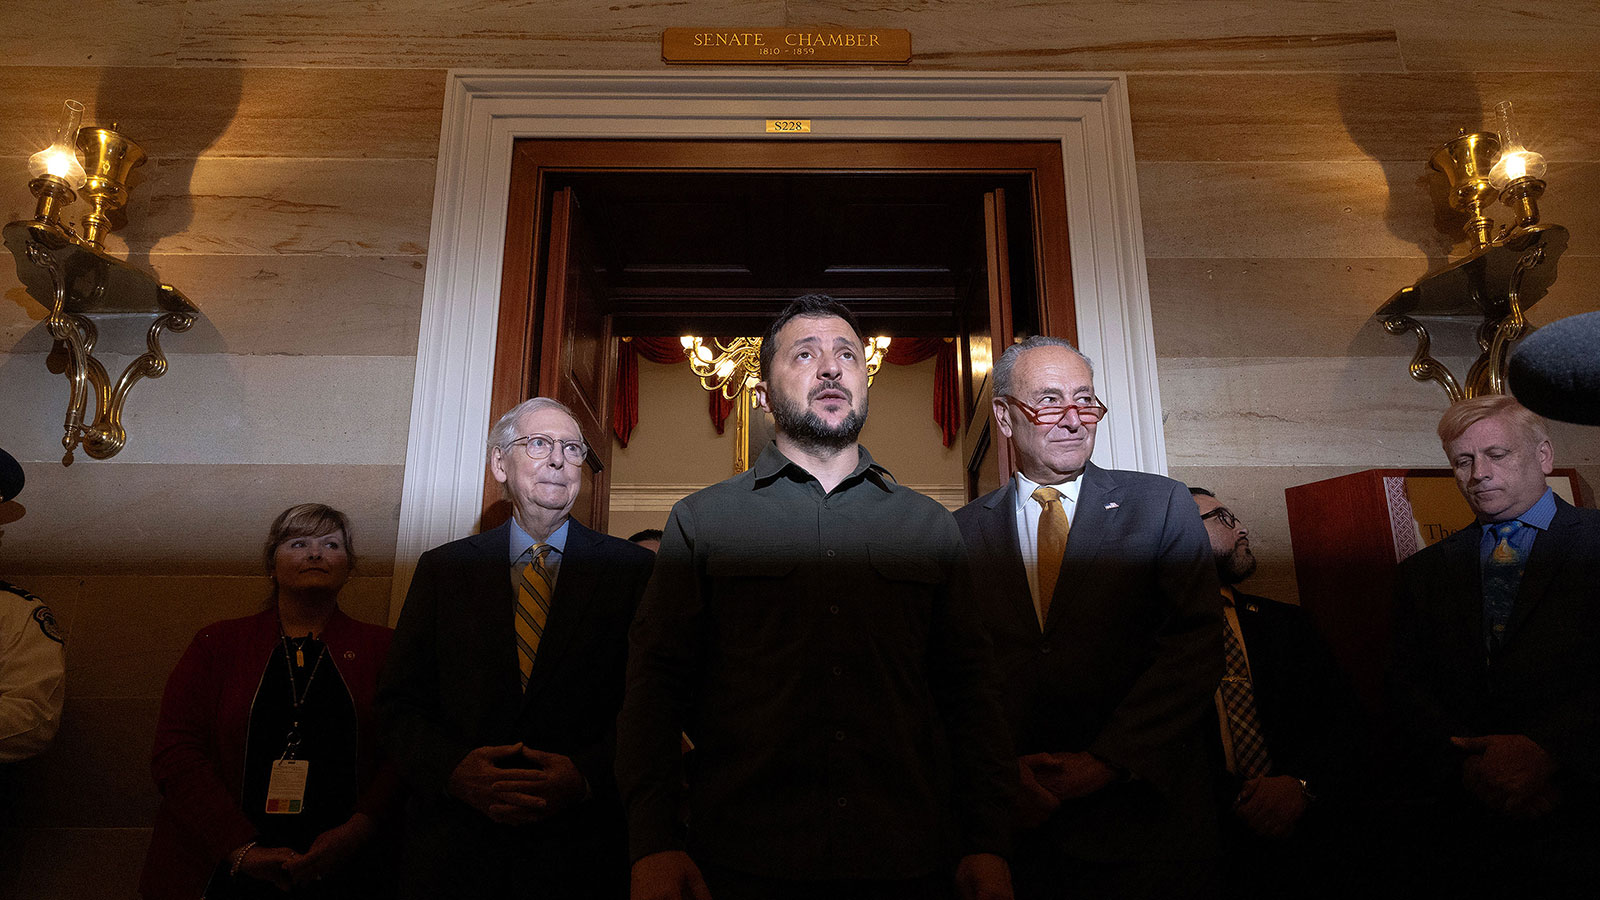 Ukrainian President Volodymyr Zelensky, flanked by Senate leaders Chuck Schumer, right, and Mitch McConnell, speaks to reporters after meeting with senators at the US Capitol in Washington, DC, on September 21, 2023.